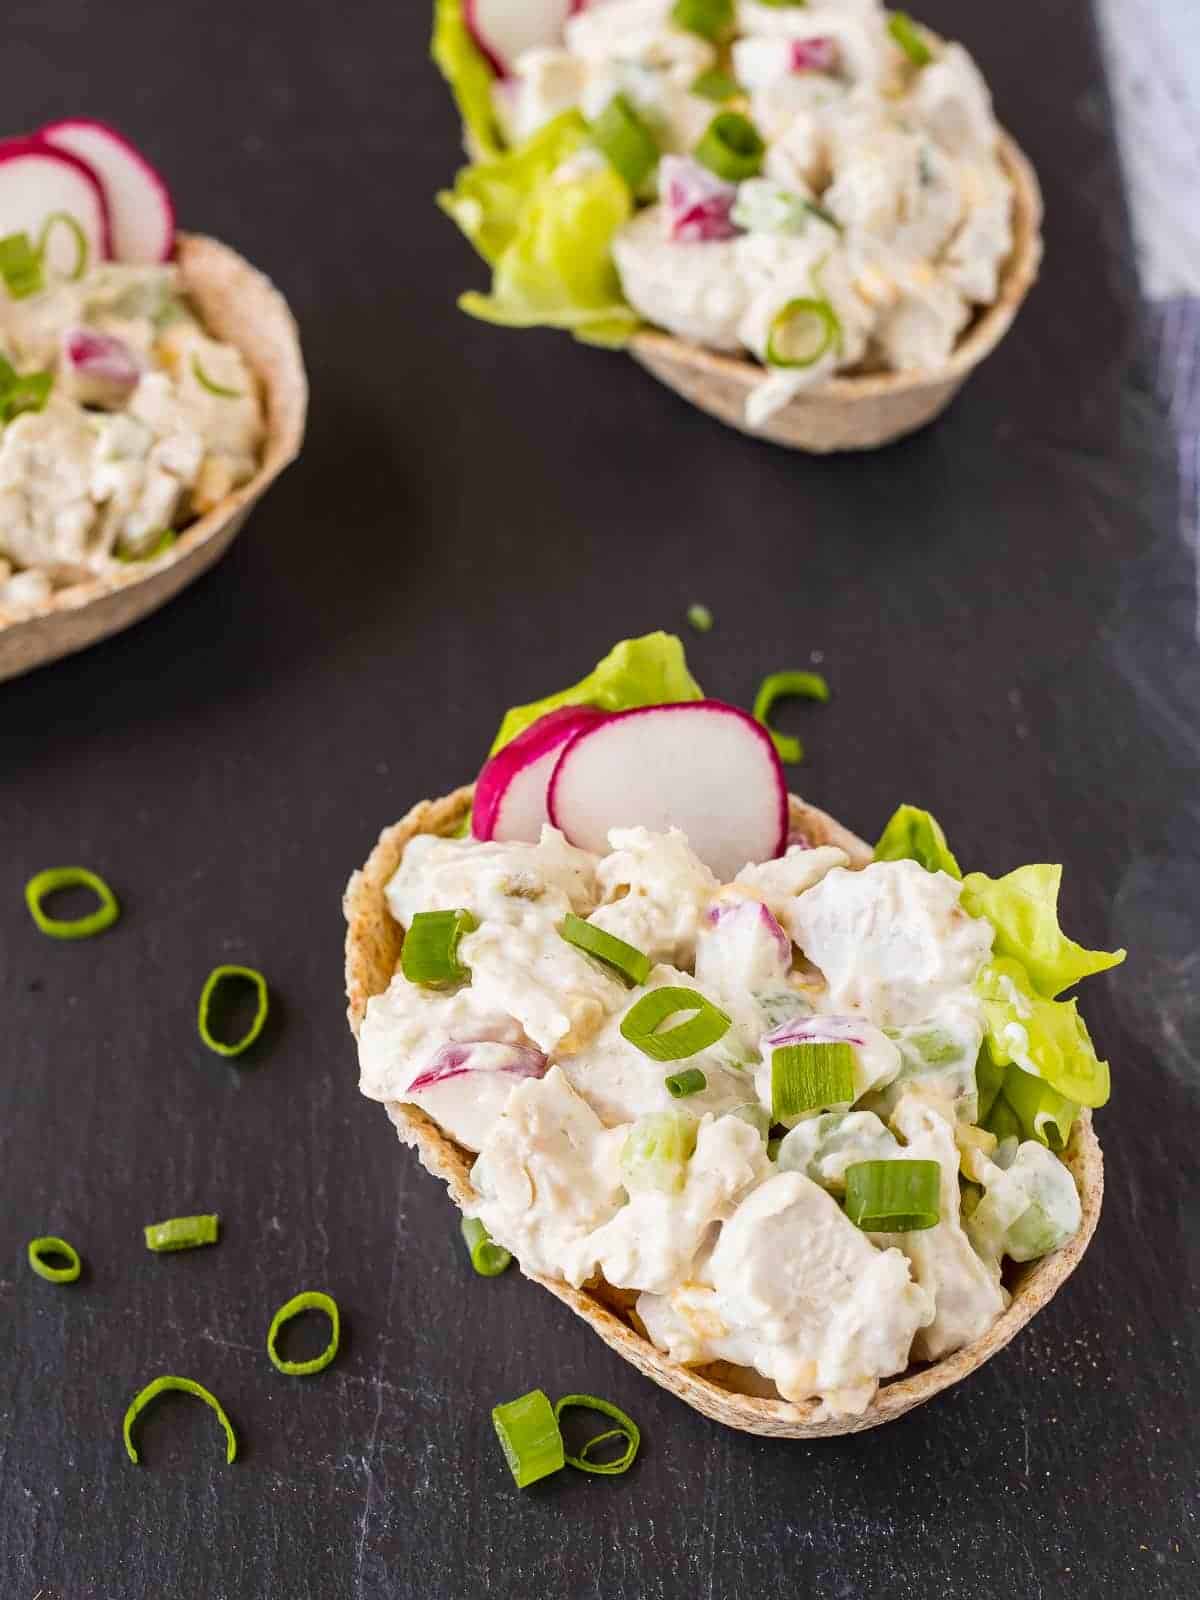 Chicken salad in tortilla boats garnished with sliced green onions.